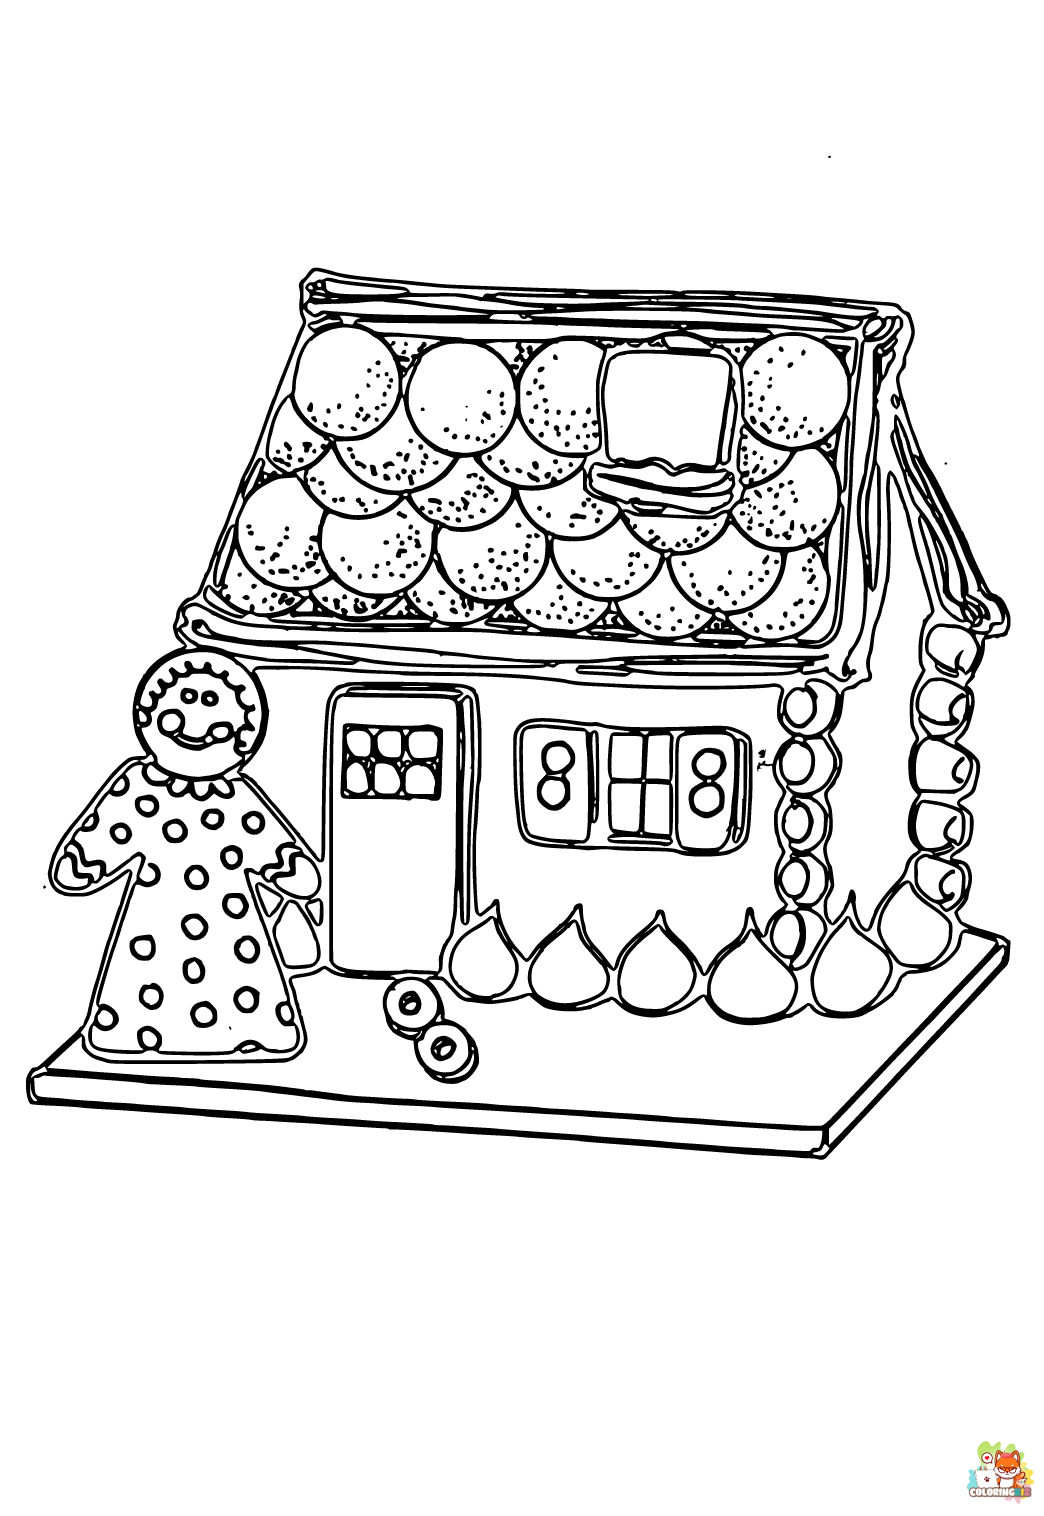 Free gingerbread house coloring pages for kids